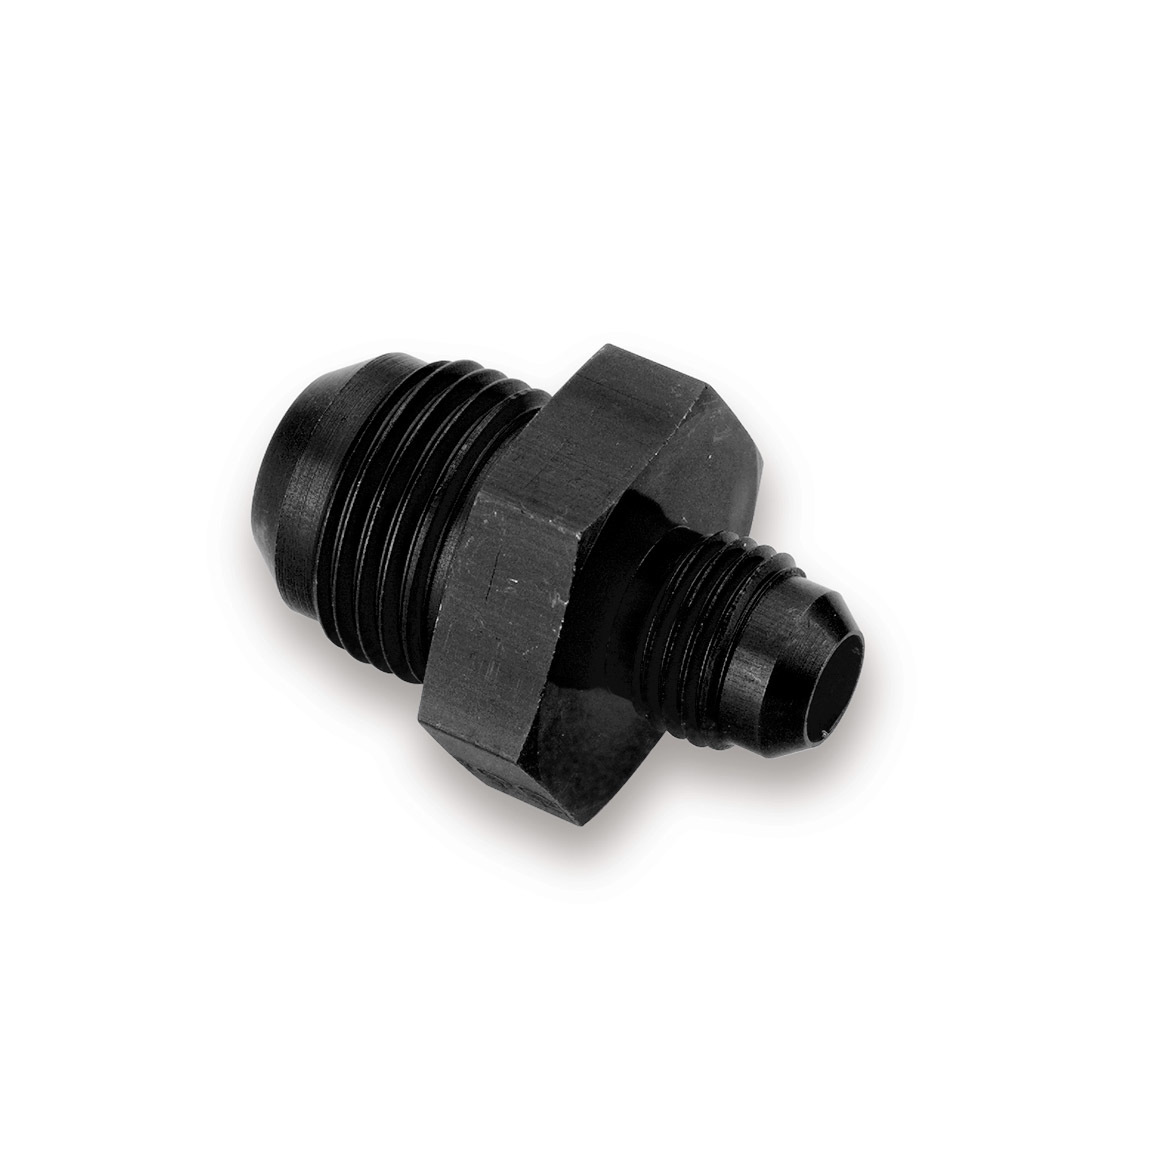 Earls AT991902ERL Fitting, Adapter, Straight, 4 AN Male to 3 AN Male, Aluminum, Black Anodized, Each